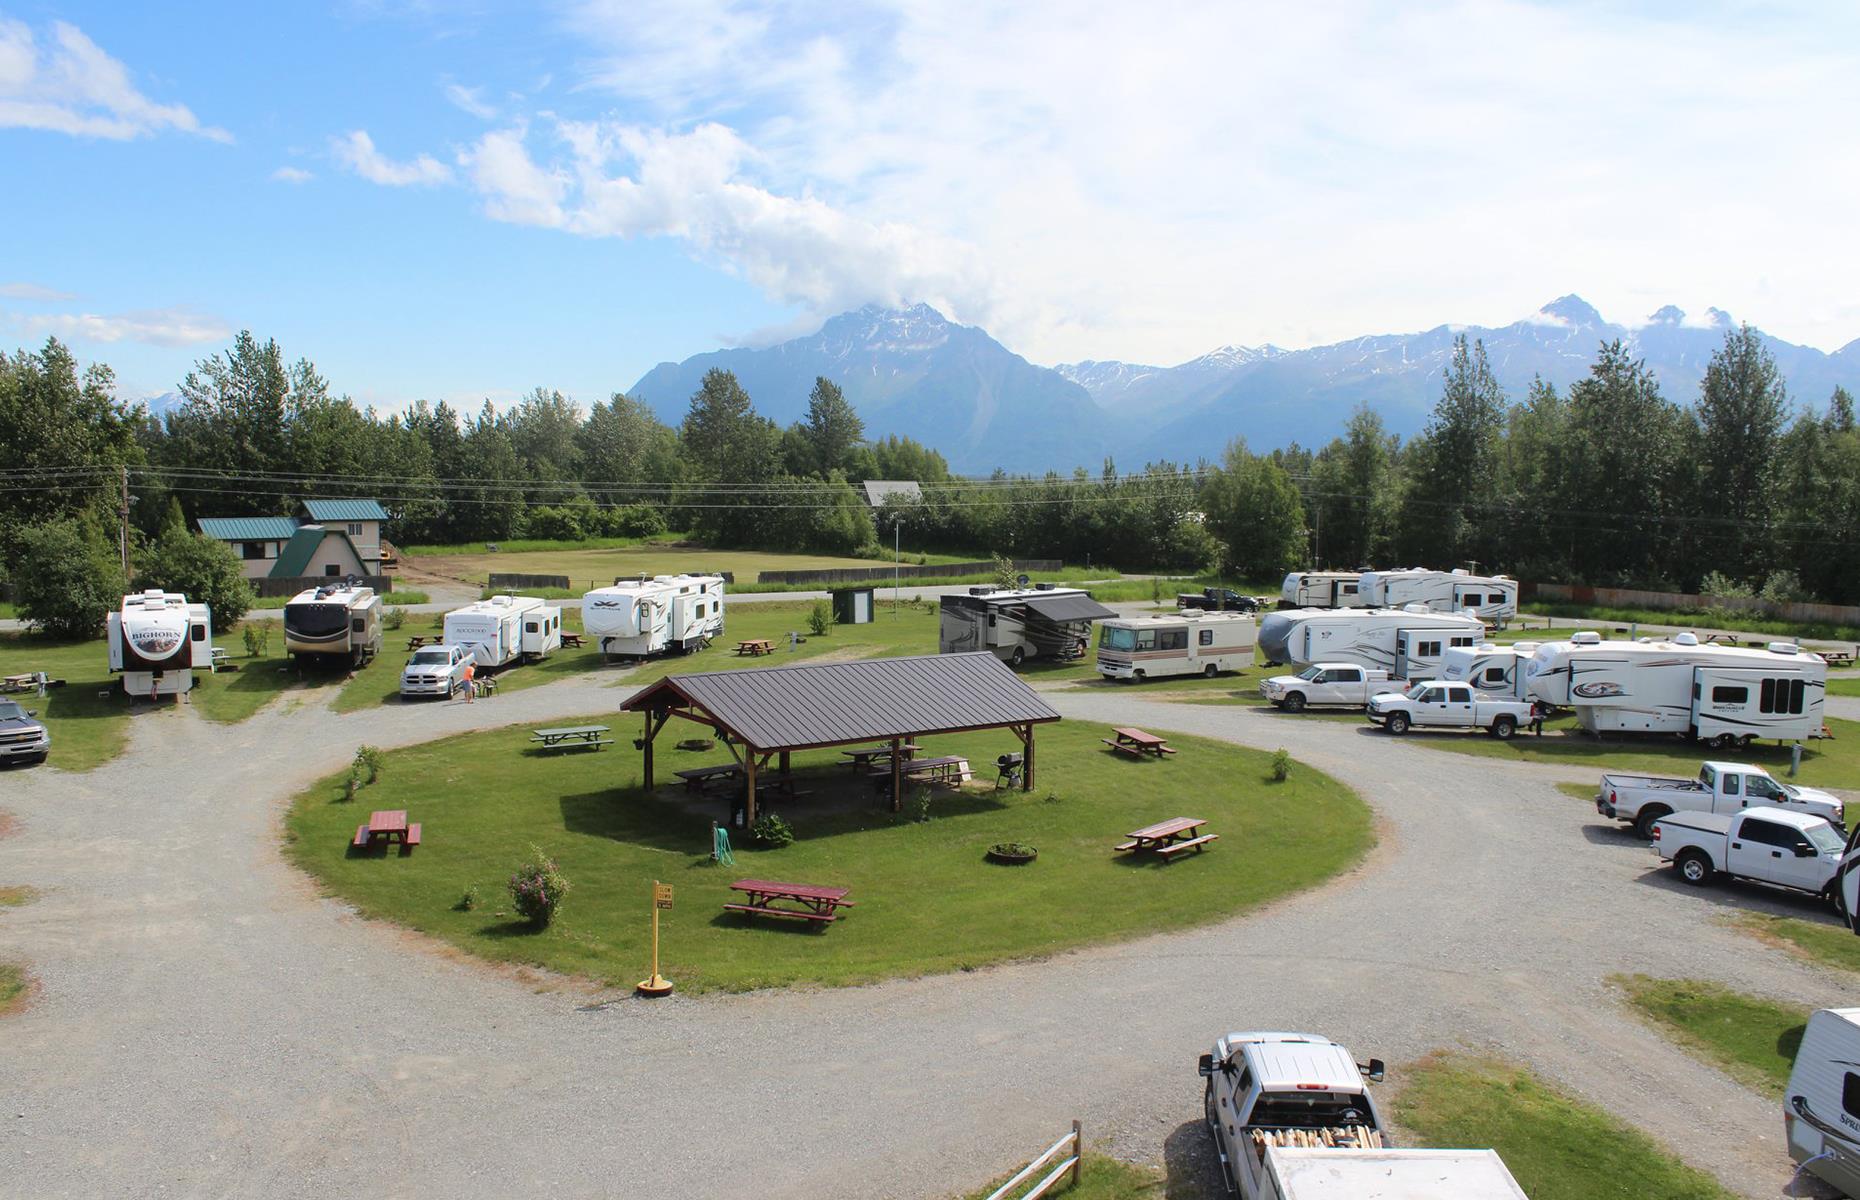 <p>Mountains loom over <a href="https://www.alaskarvpark.net/MonthlyGuests.html">this charming RV park</a>, which is dropped in the scenic Mat-Su Valley region of southern Alaska. Deluxe RV sites are available with full hook-up, fire rings and picnic tables, so guests can be completely self-sufficient (which the park advises at present). Nature is never far away here either: the park is flecked with native wildflowers and fir trees, and home to plenty of birdlife too. </p>